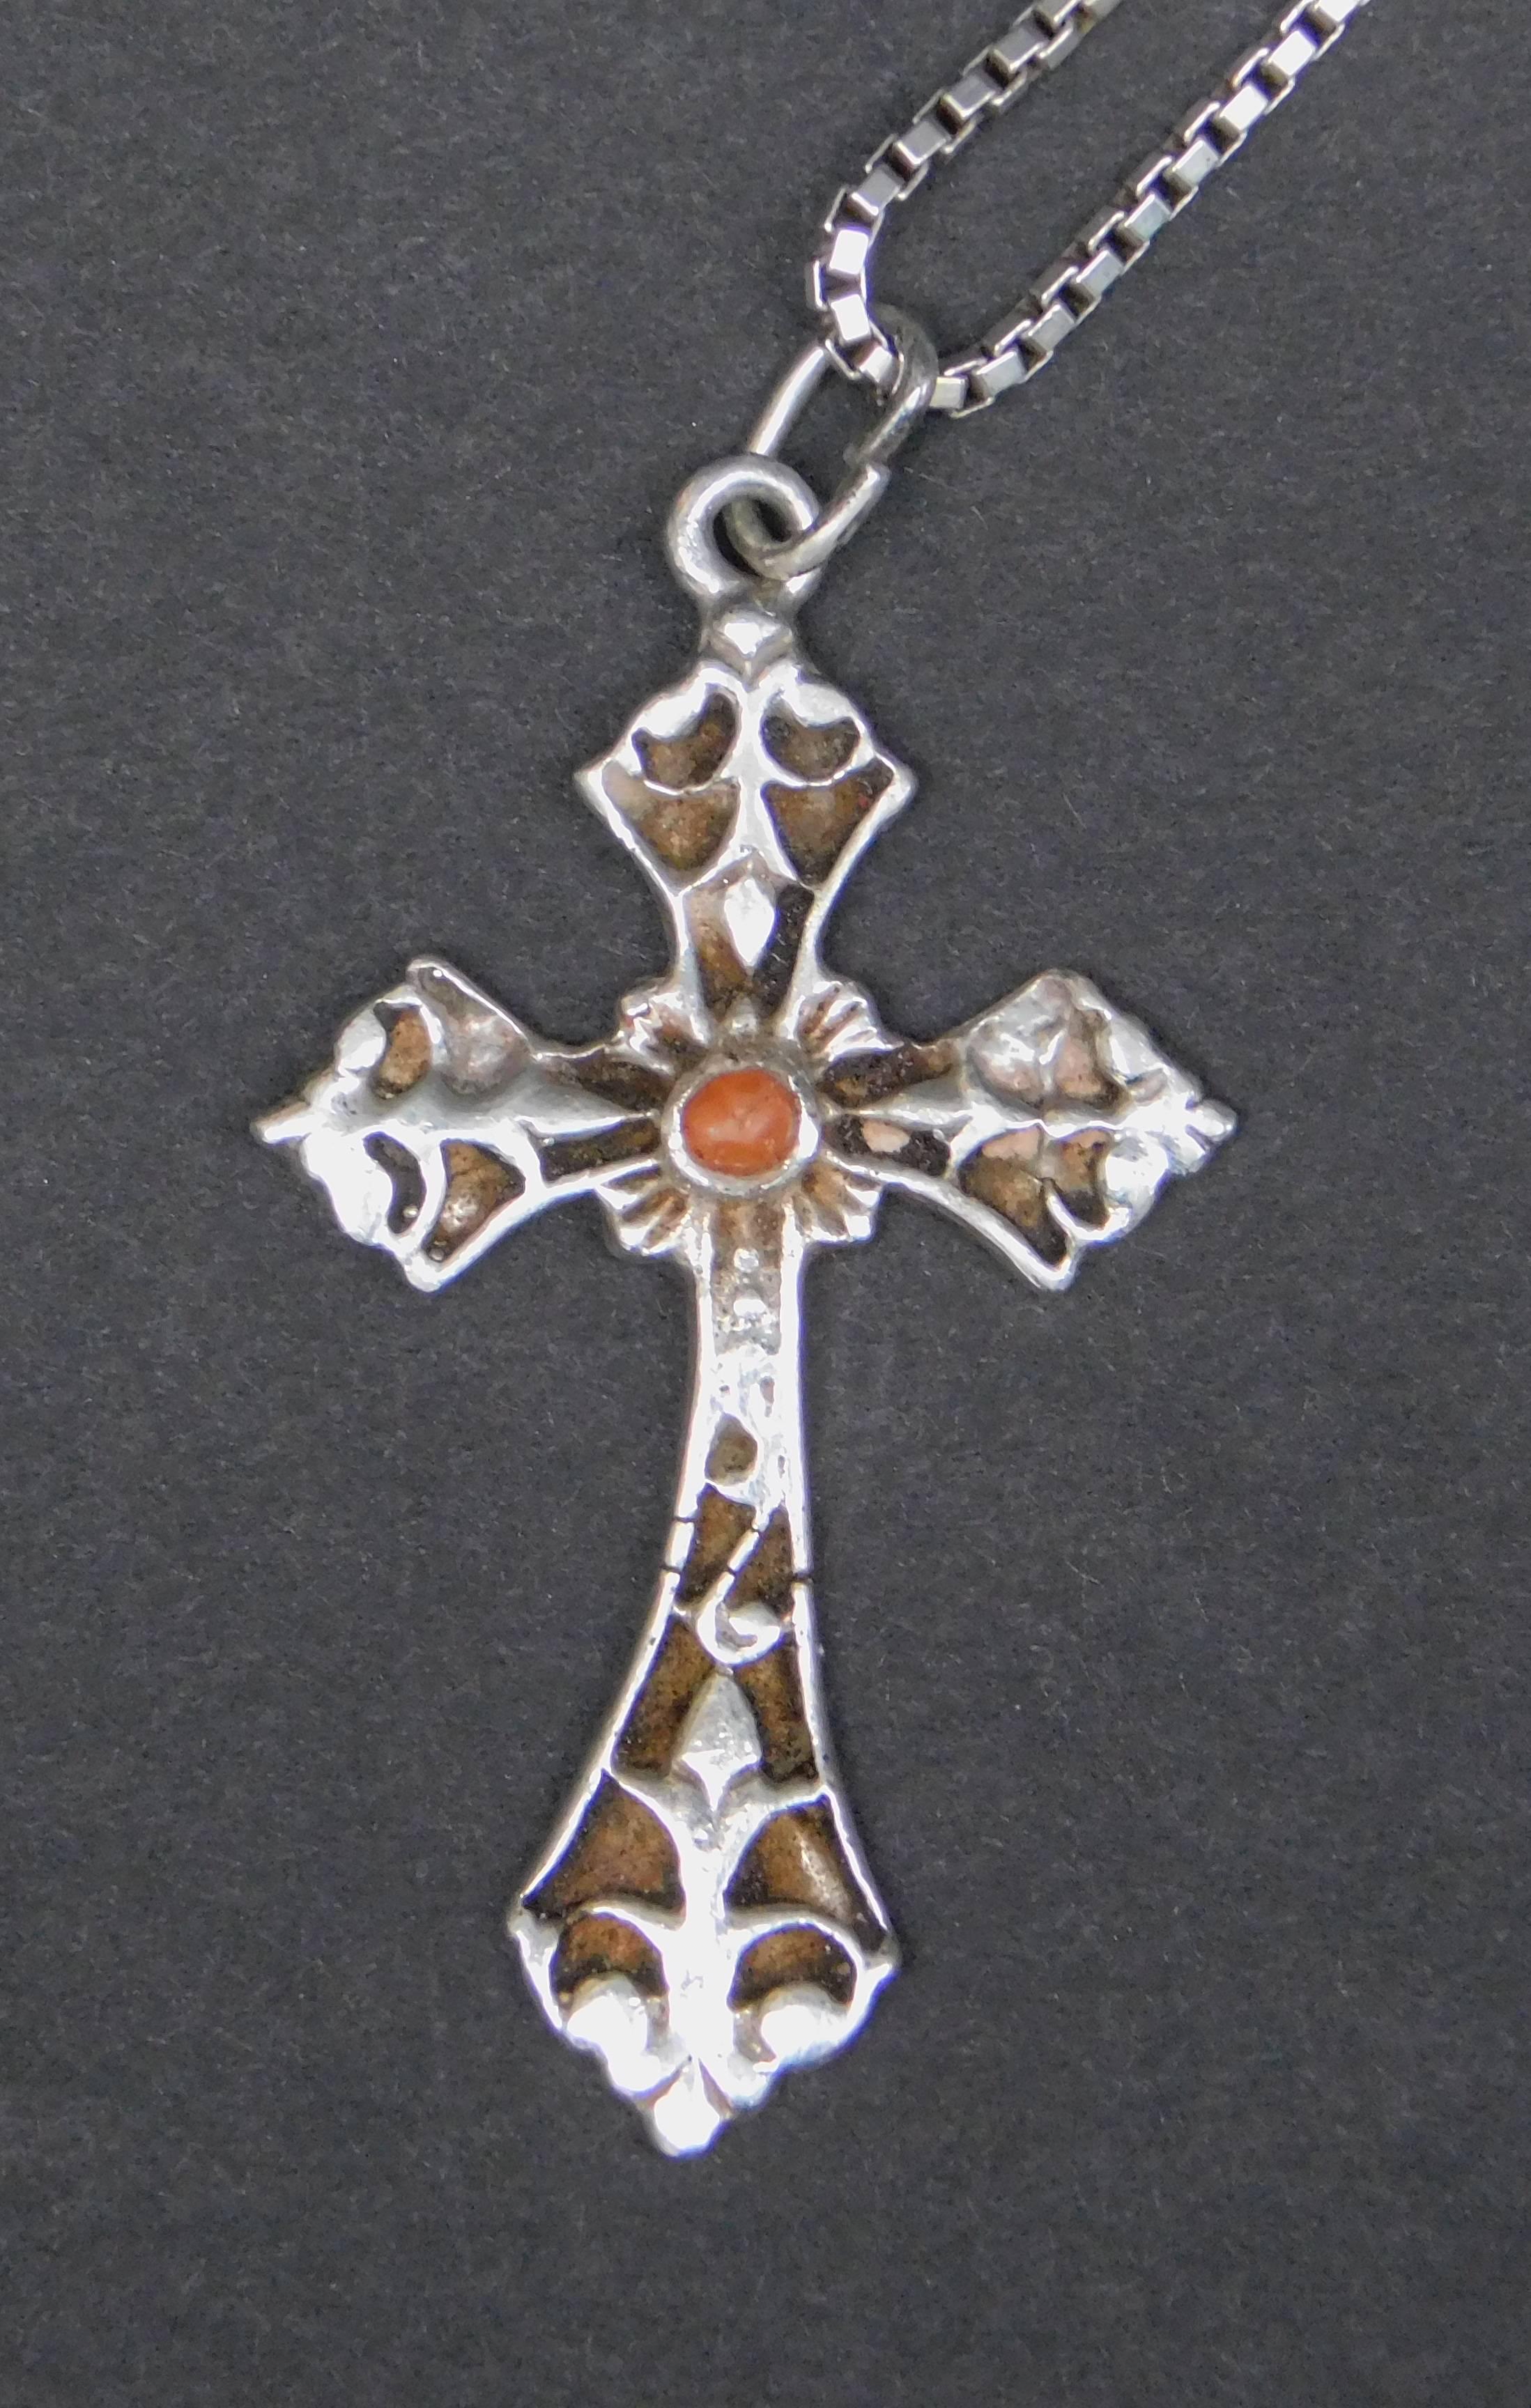 A very elegant sterling silver cross with a small red coral center inset symbolising the blood of Christ. The pendant is from the 1930's and is hung on a sterling silver box chain from the 1970's.
cross=3.50 x2 cm
chain=45 cm long